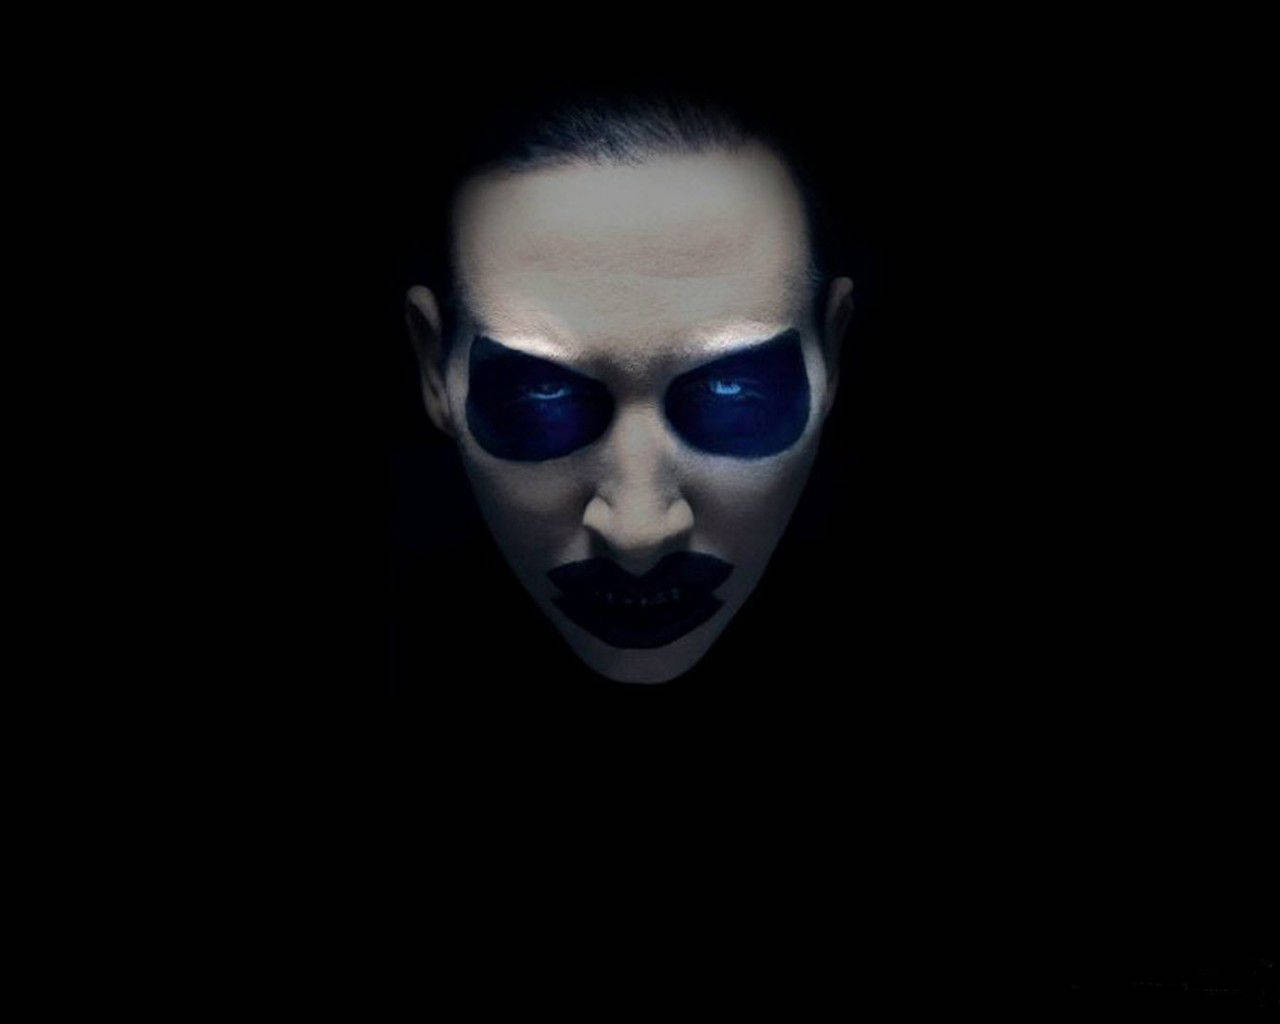 Marilyn Manson, A Controversial Rock Star